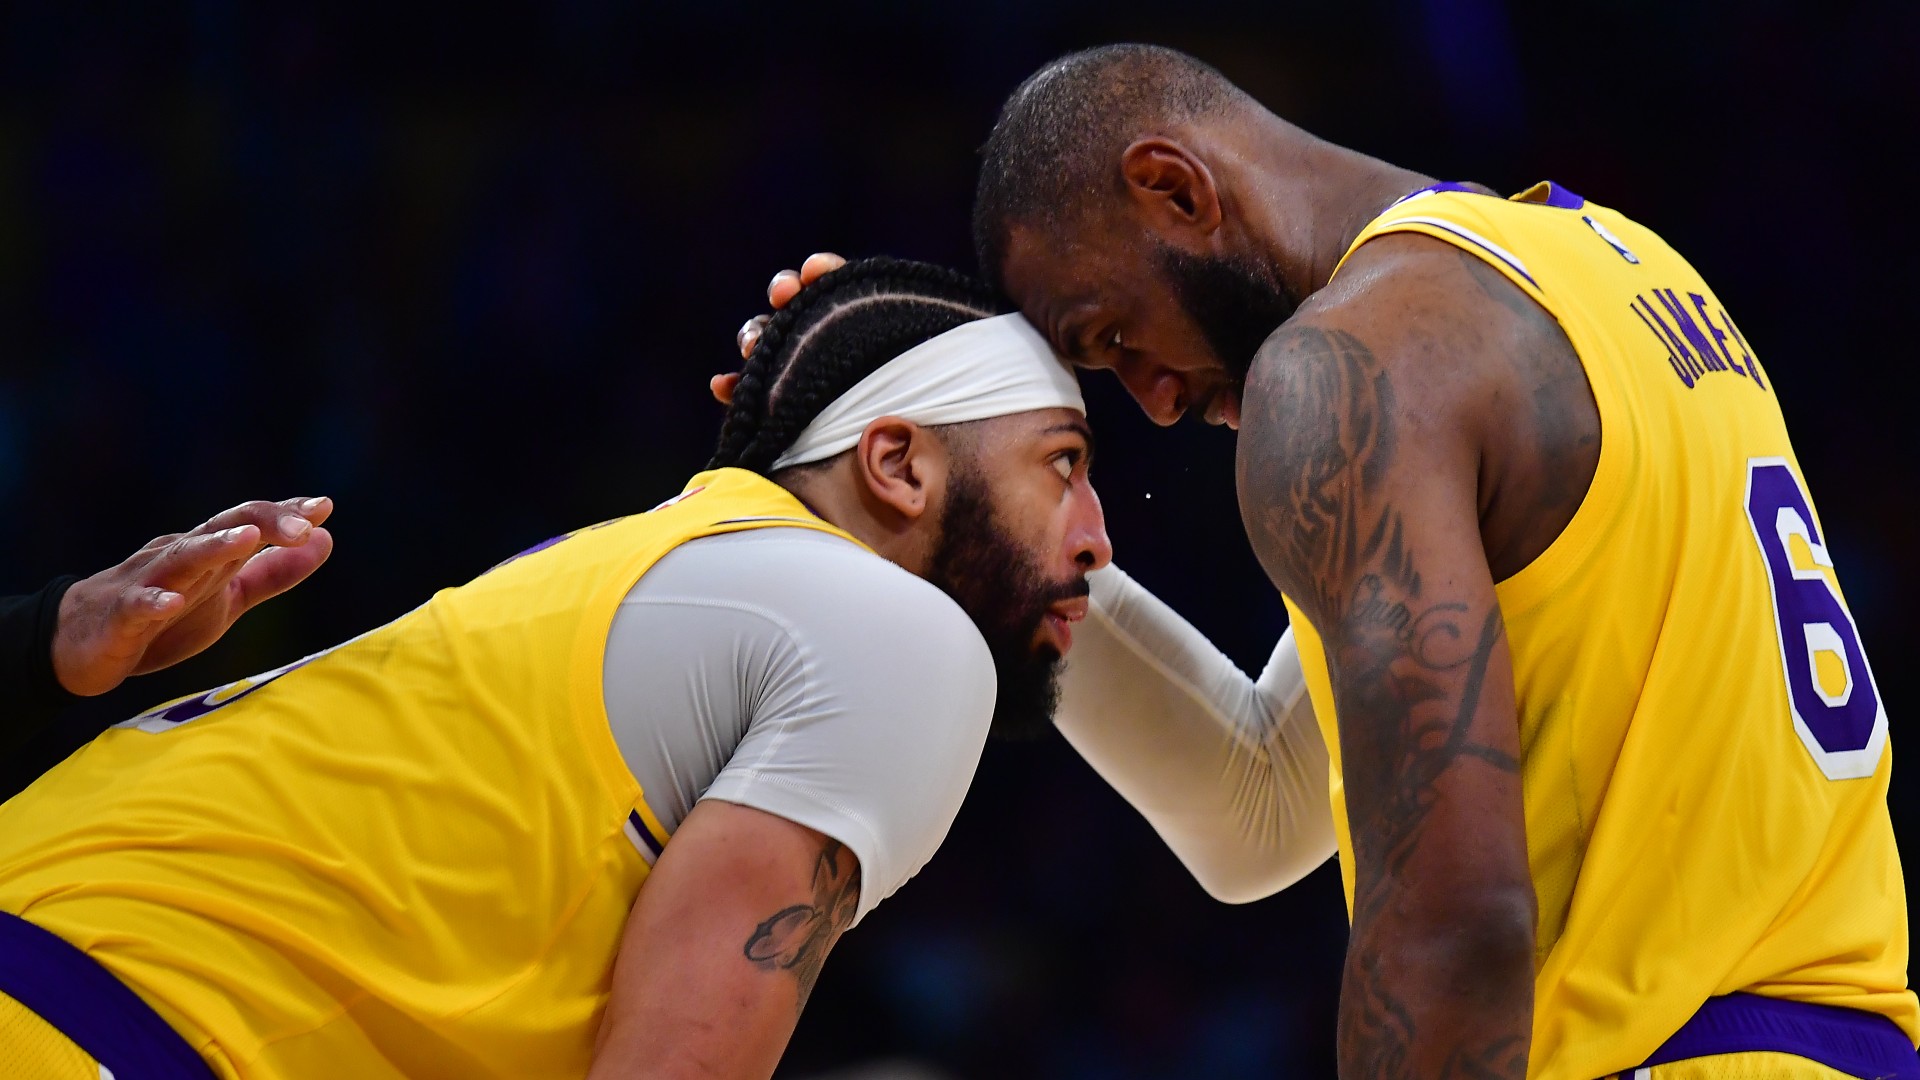 LeBron James apologizes to fans for disappointing LA Lakers season